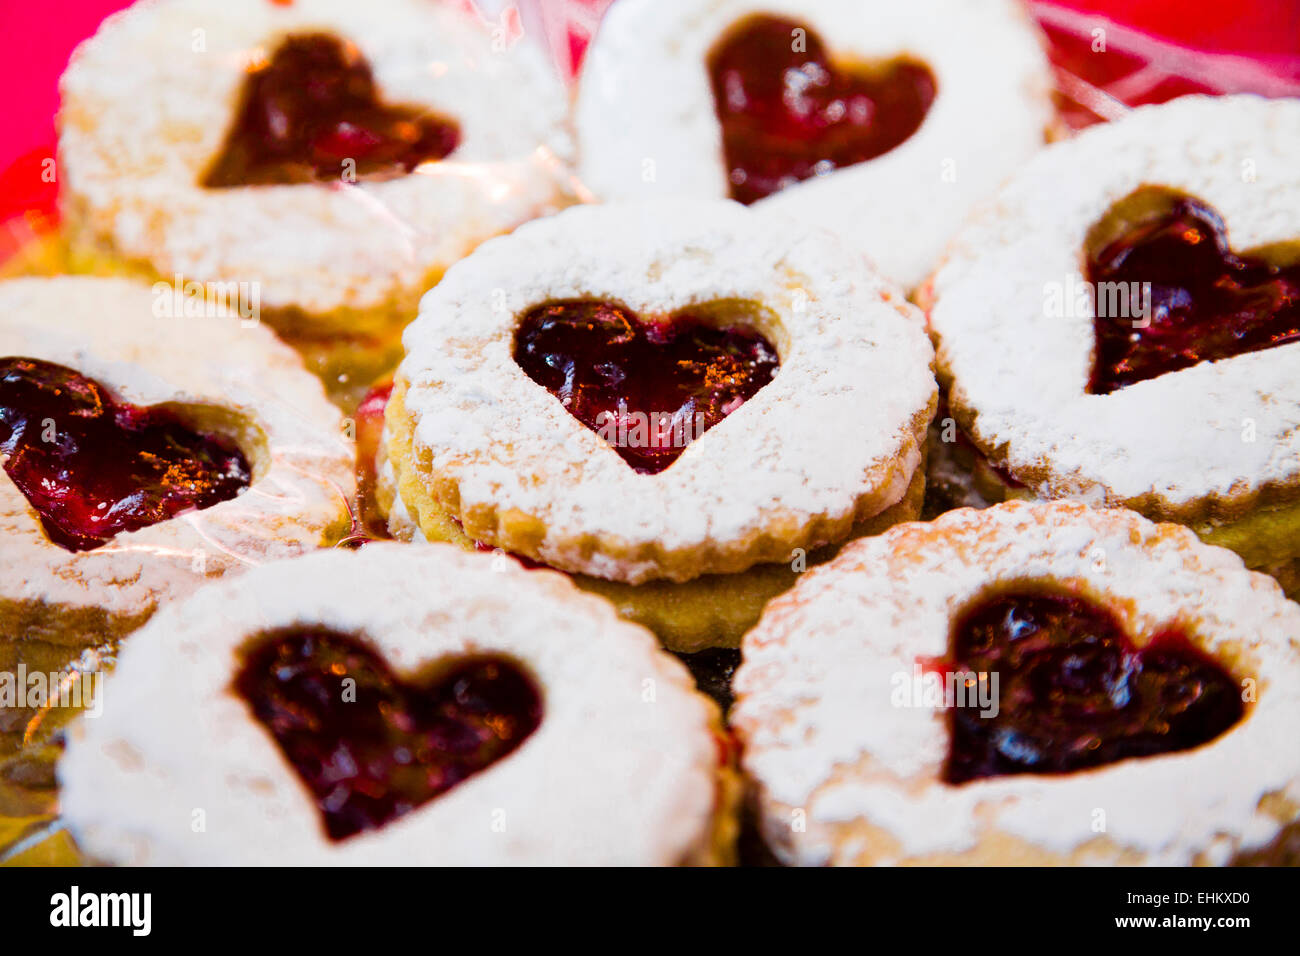 Heart-shaped jammy dodger sandwich biscuits Stock Photo